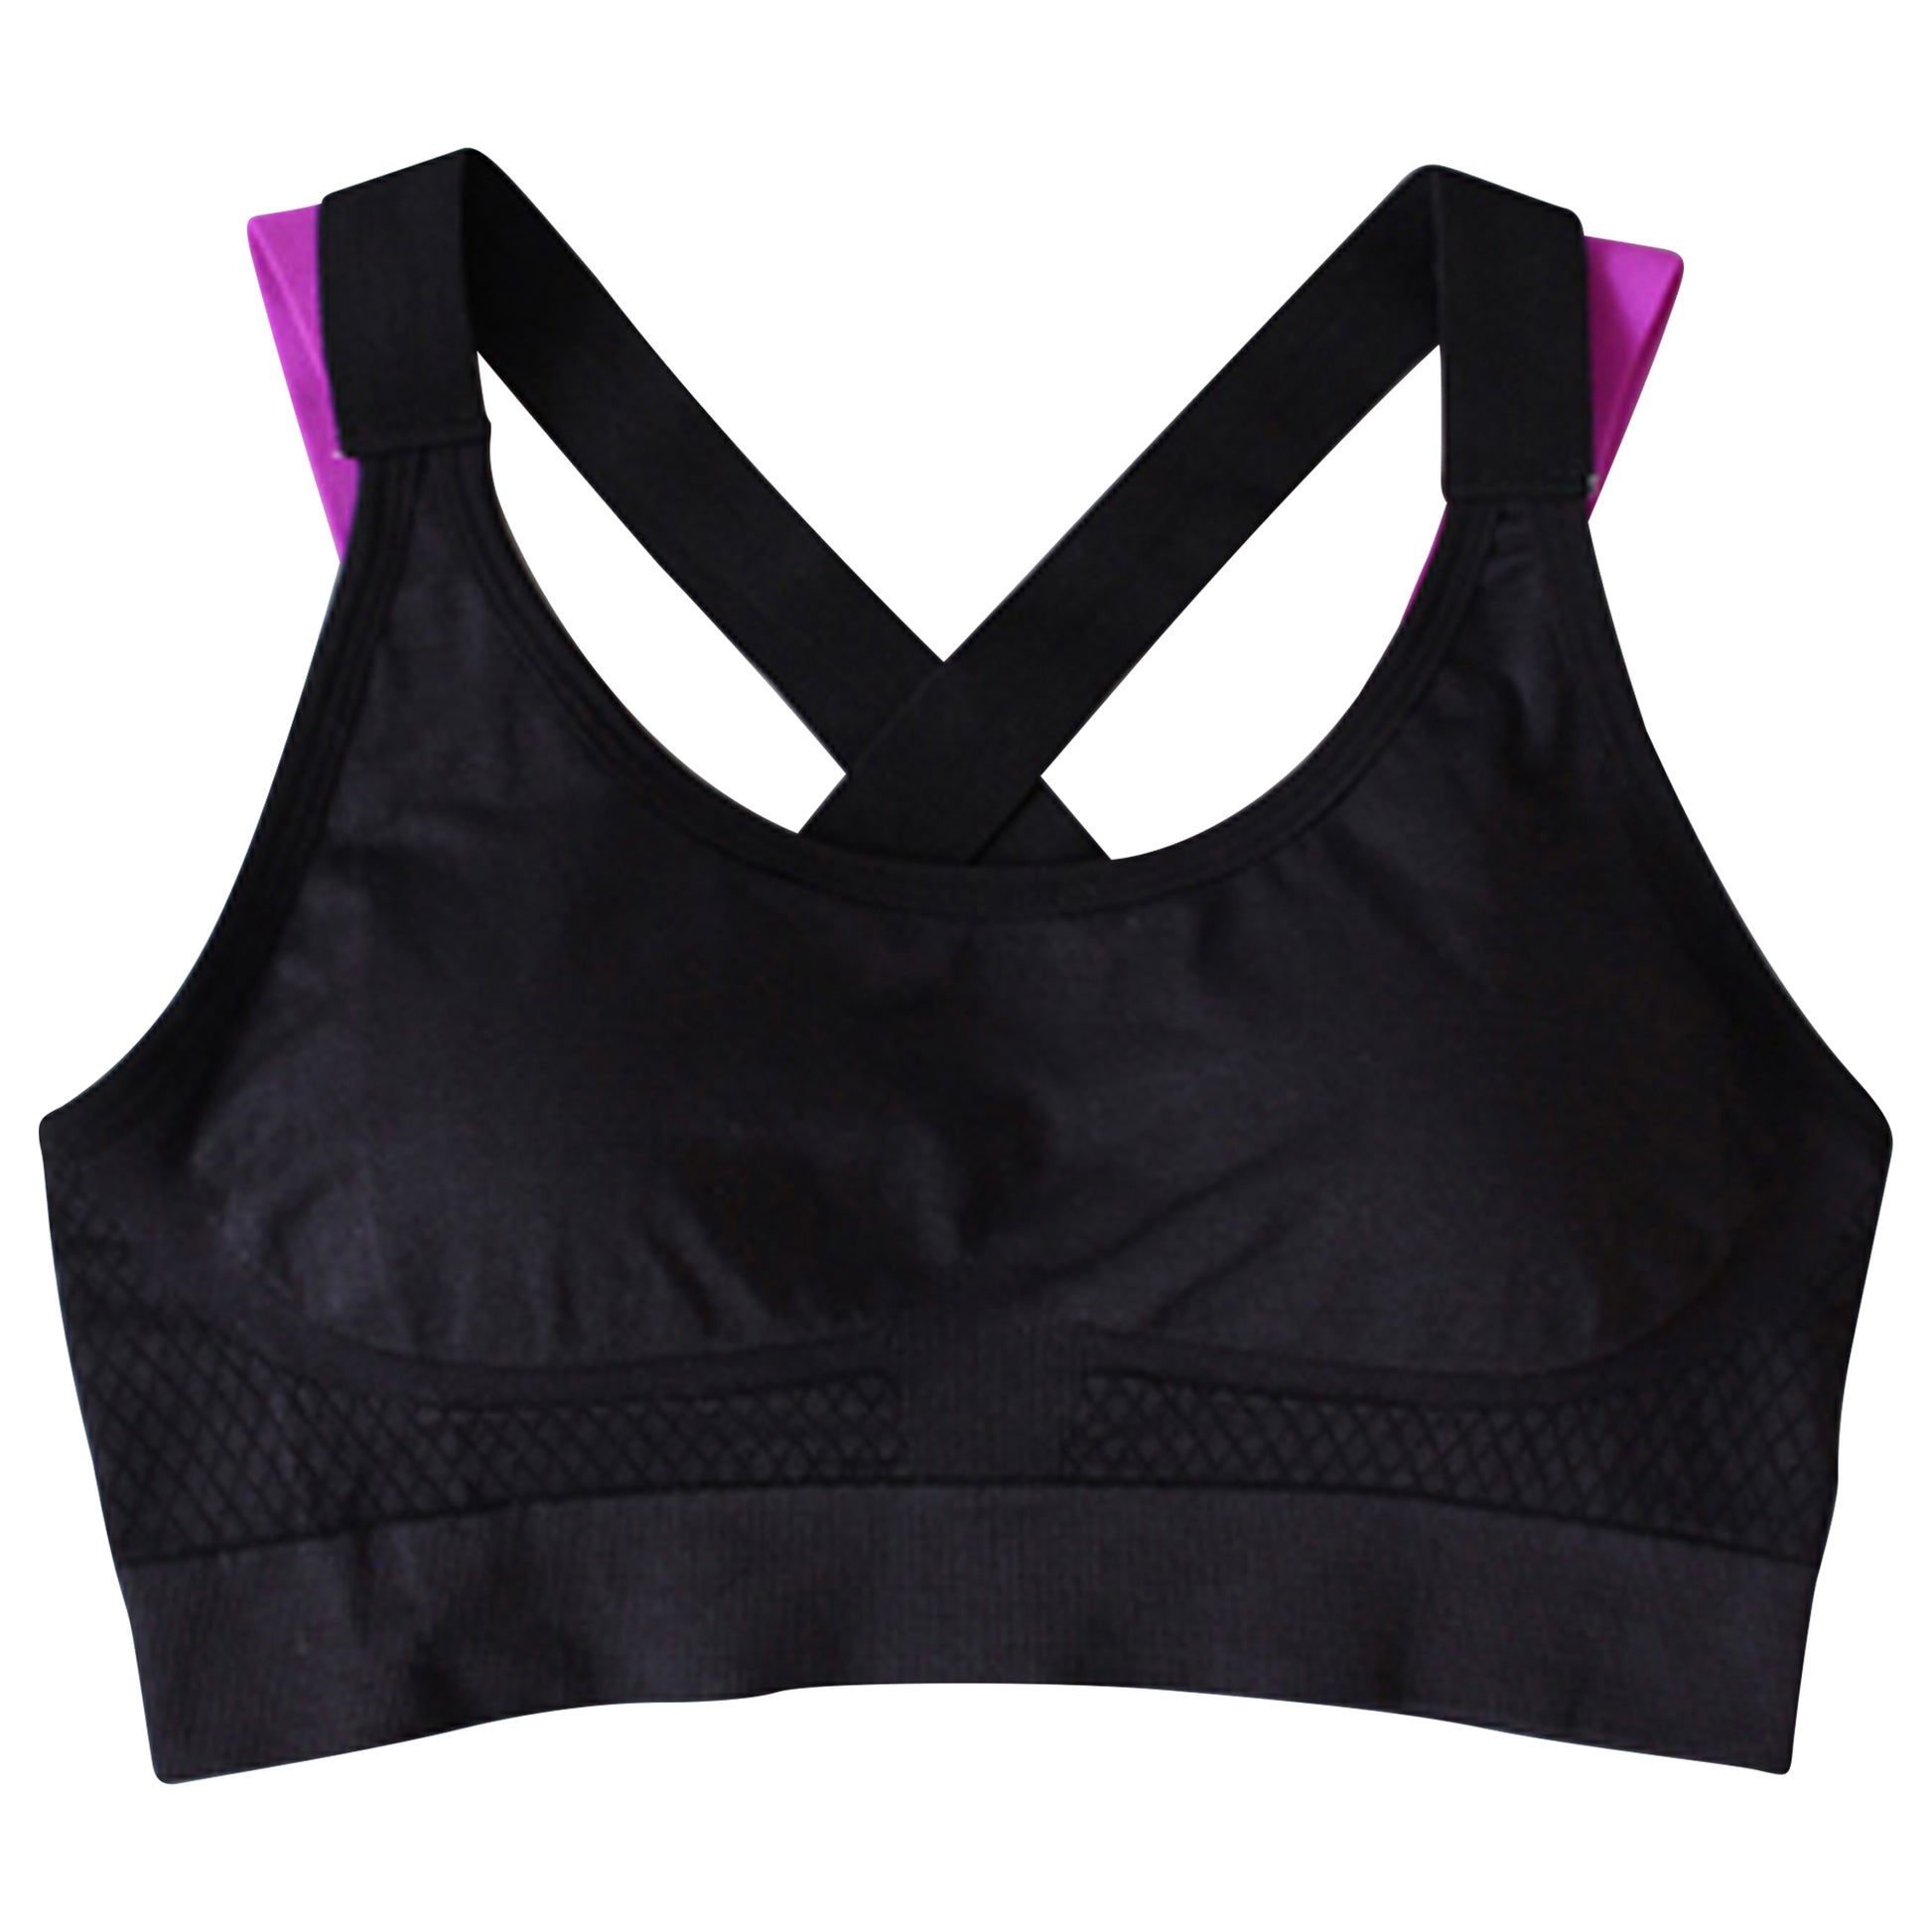 Sports bra with crossed straps in pink for girls and women